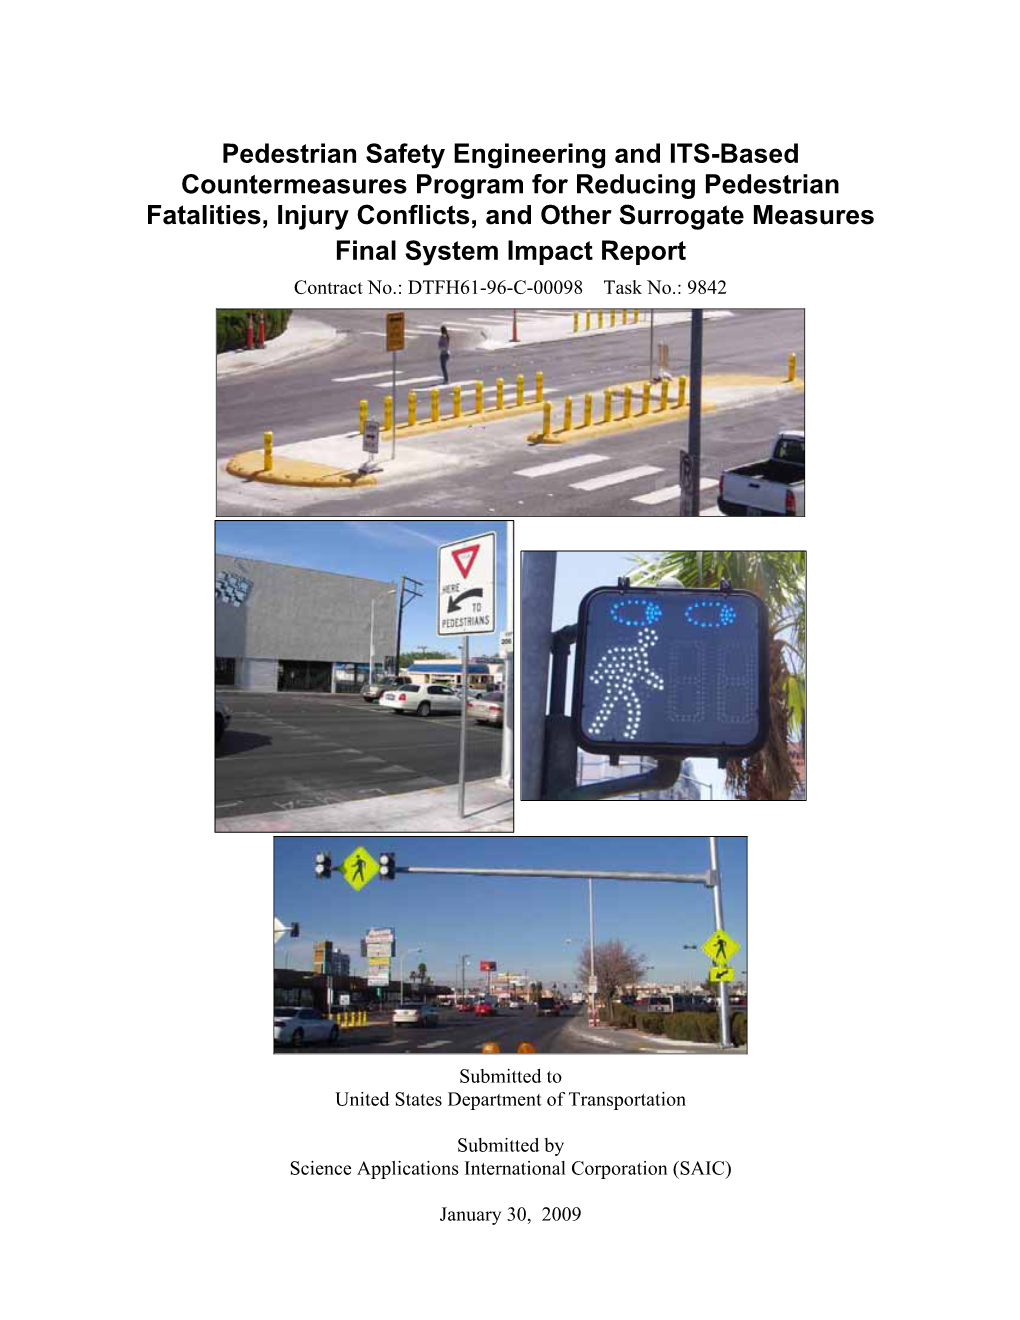 Pedestrian Safety Engineering and ITS-Based Countermeasures